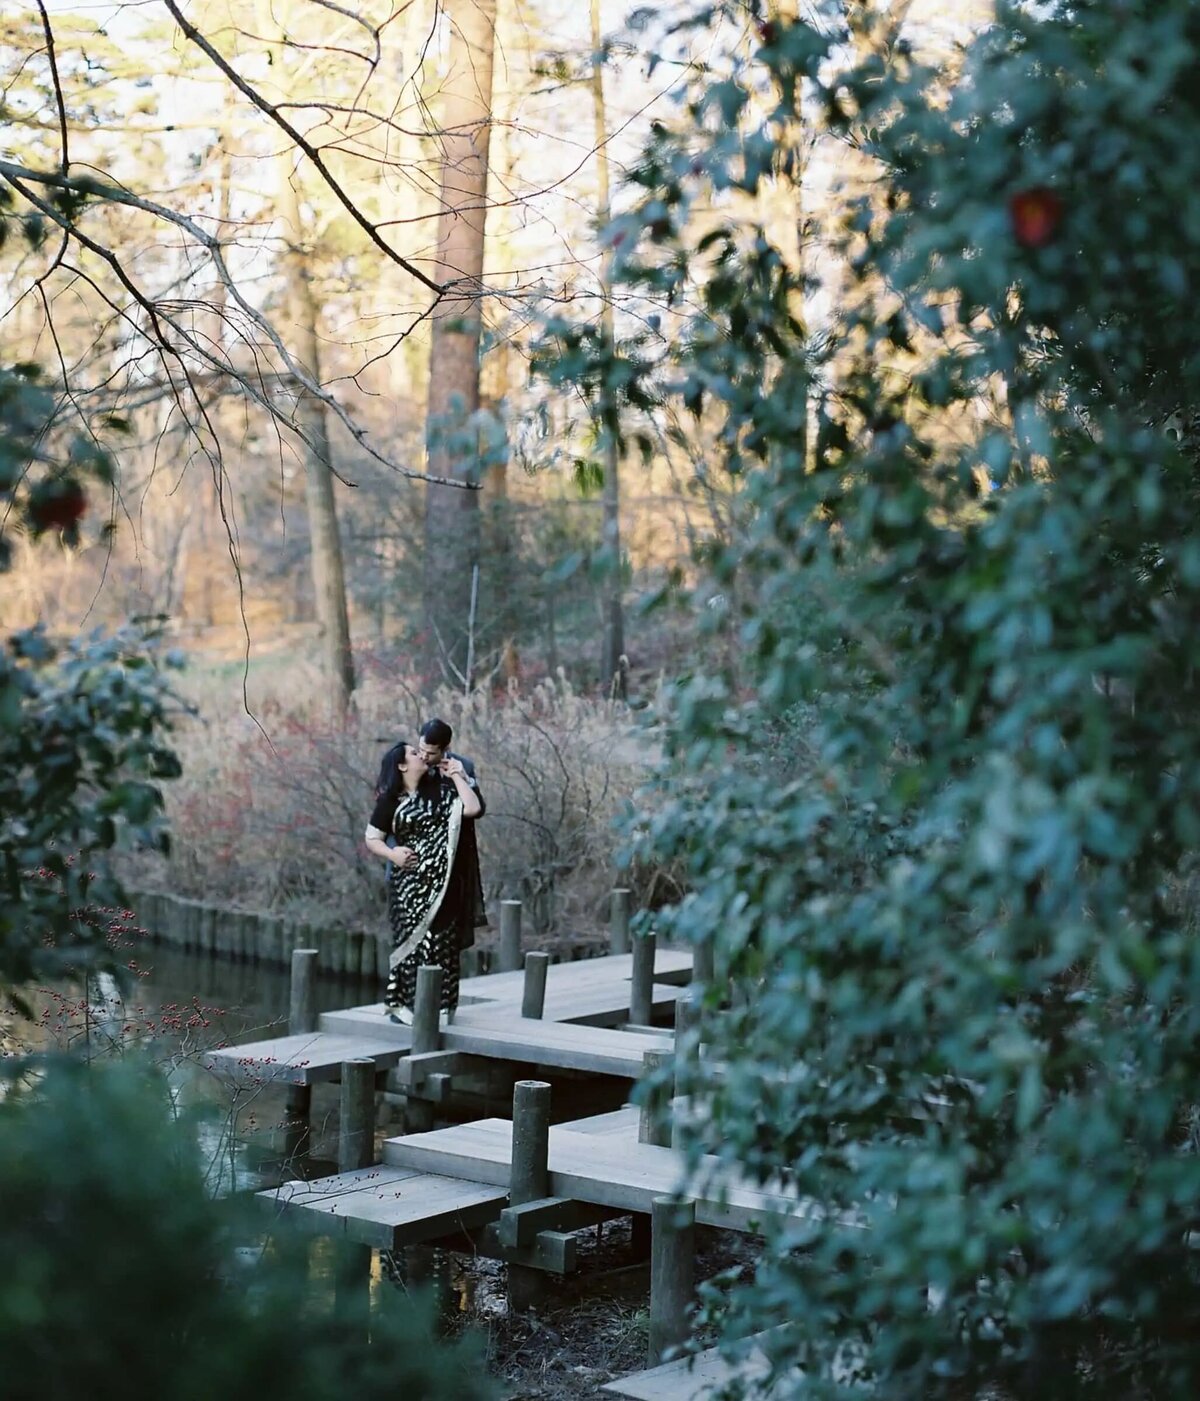 A romantic scene with a couple embracing on a wooden bridge in a serene woodland area